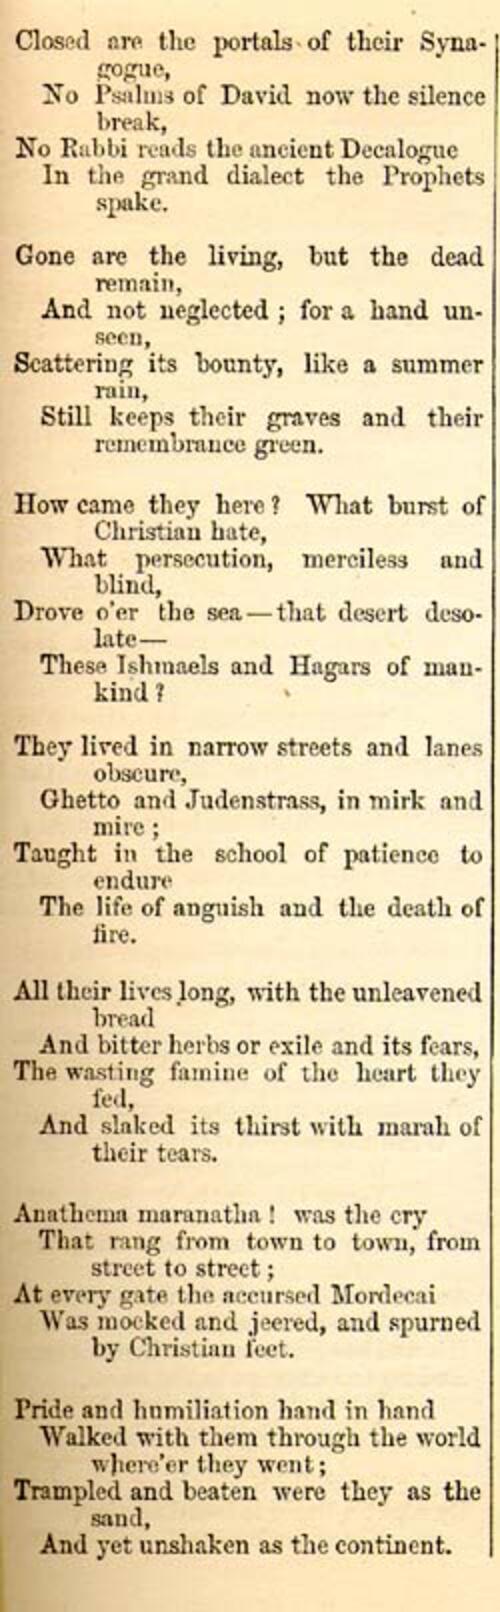 "The Jewish Cemetery at Newport," by Emma Lazarus, page 2